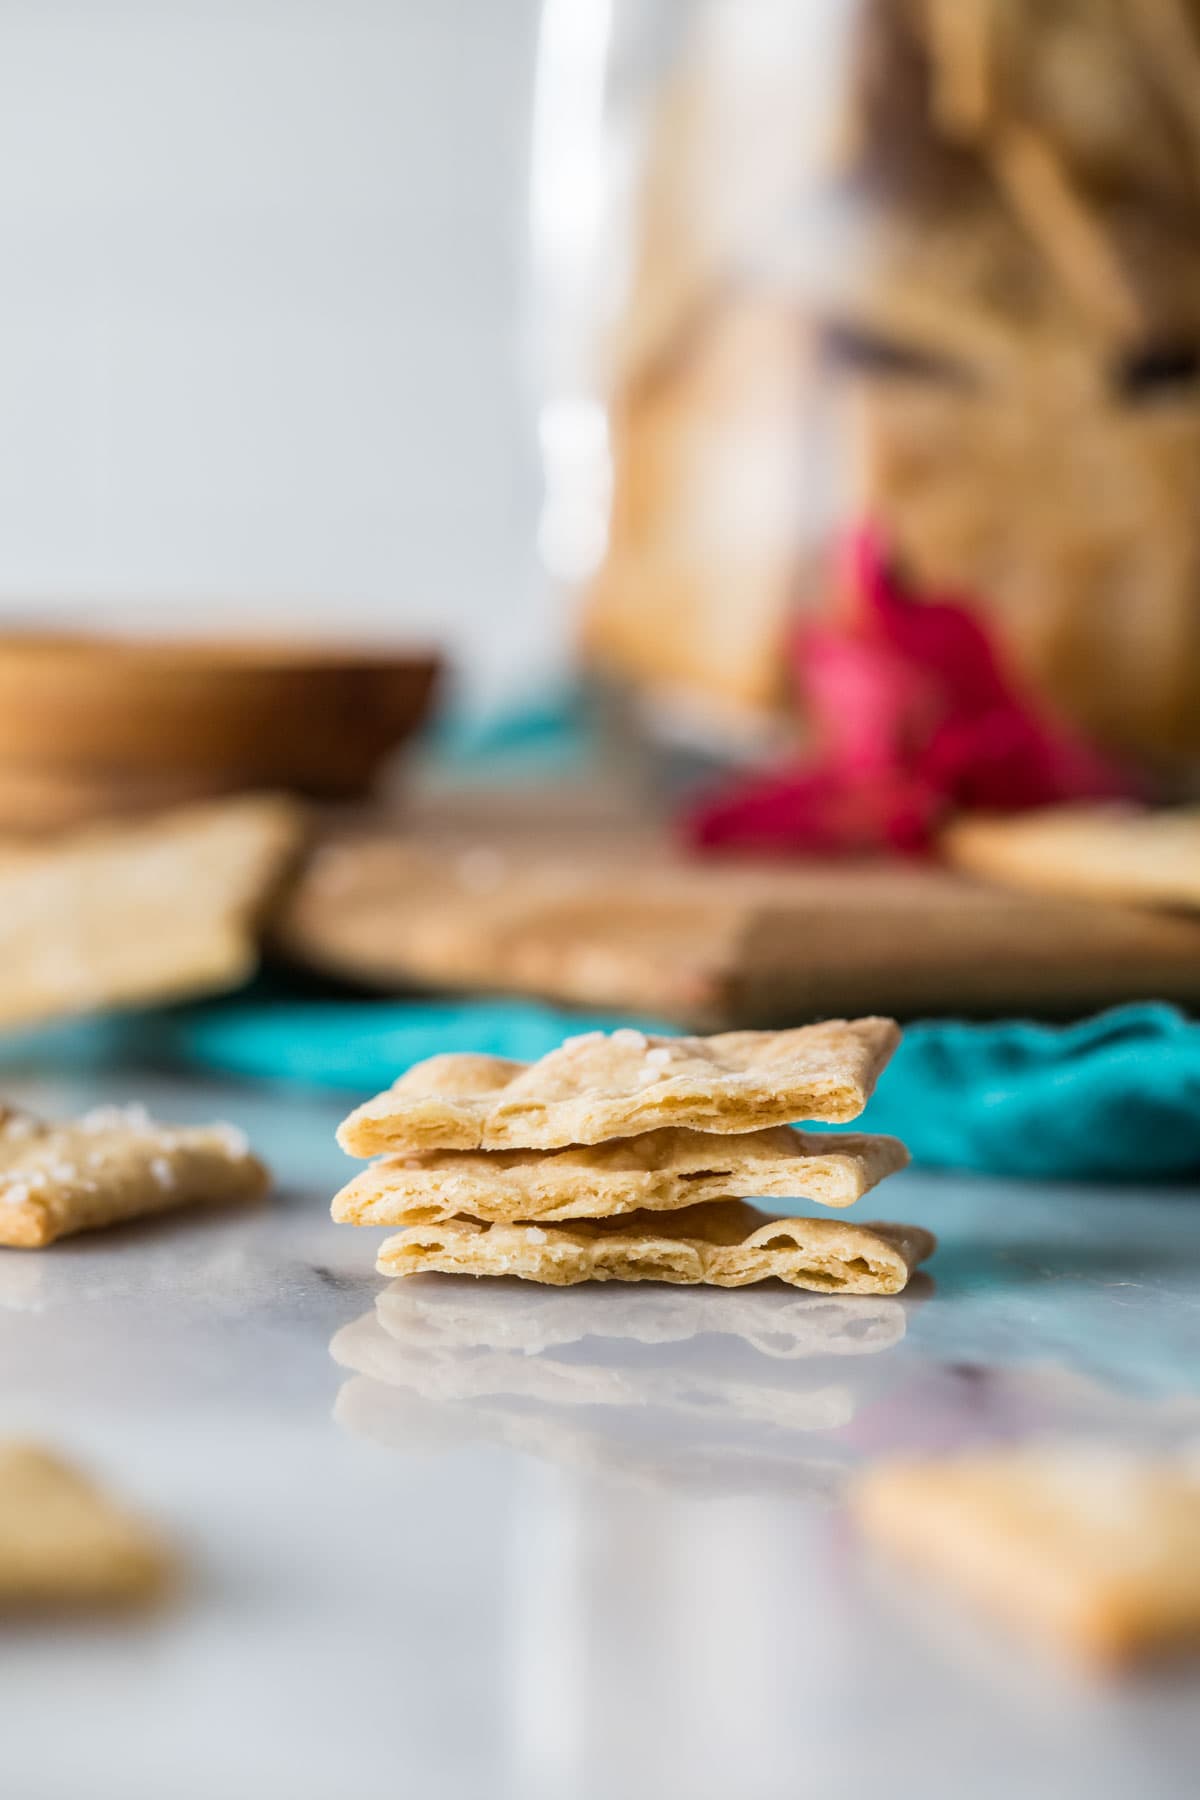 Three crackers stacked on top of each other to show their interior texture.